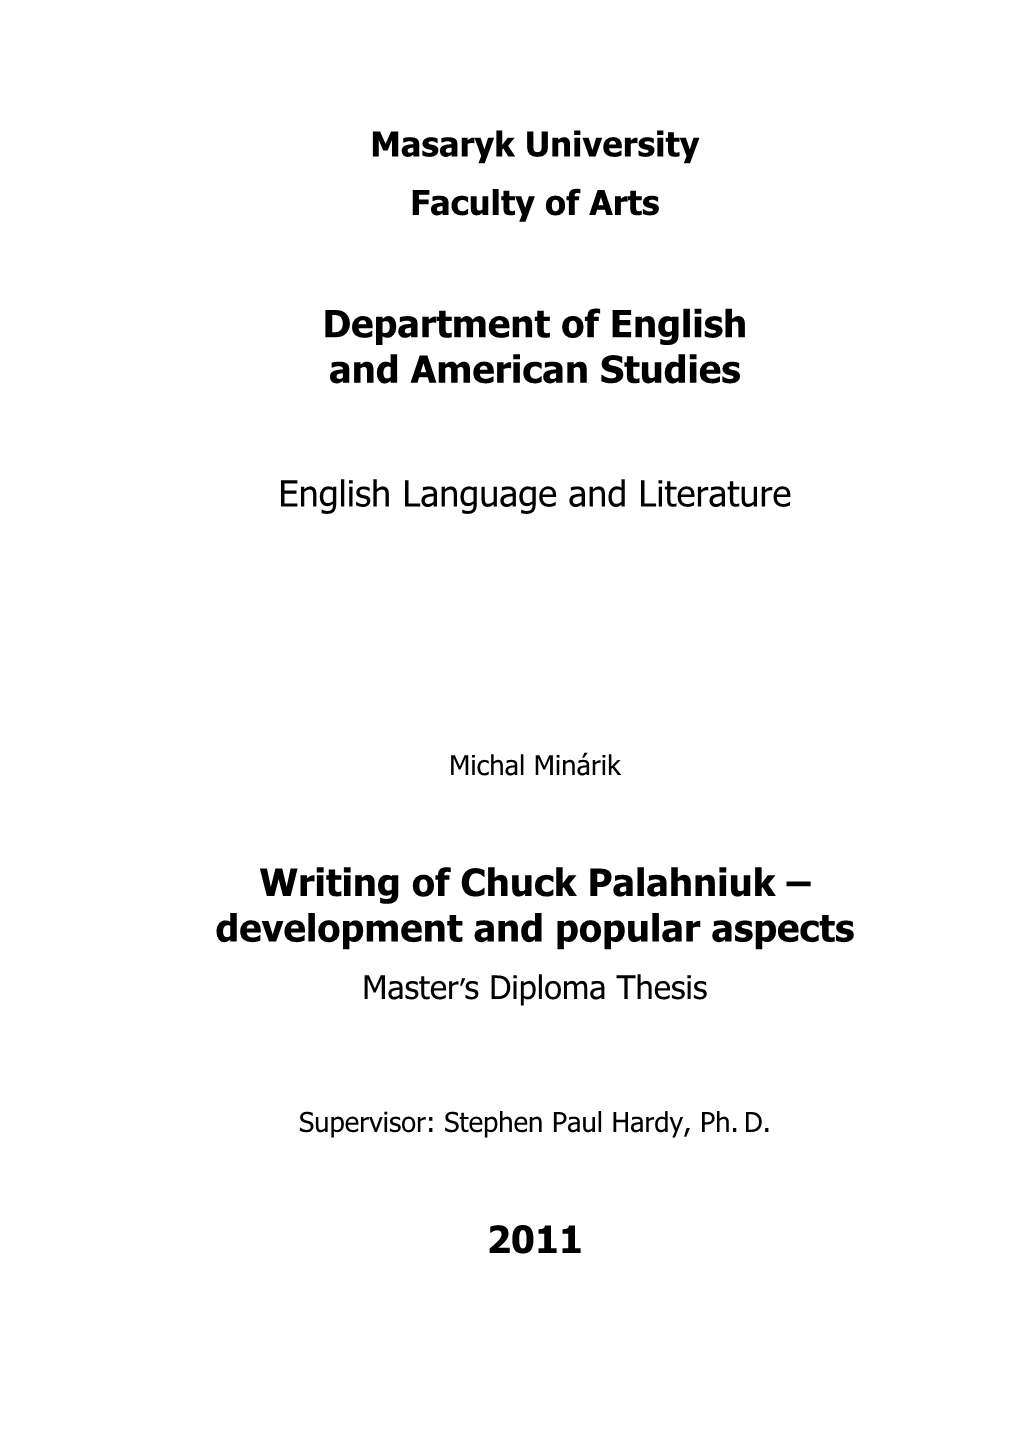 Department of English and American Studies Writing of Chuck Palahniuk